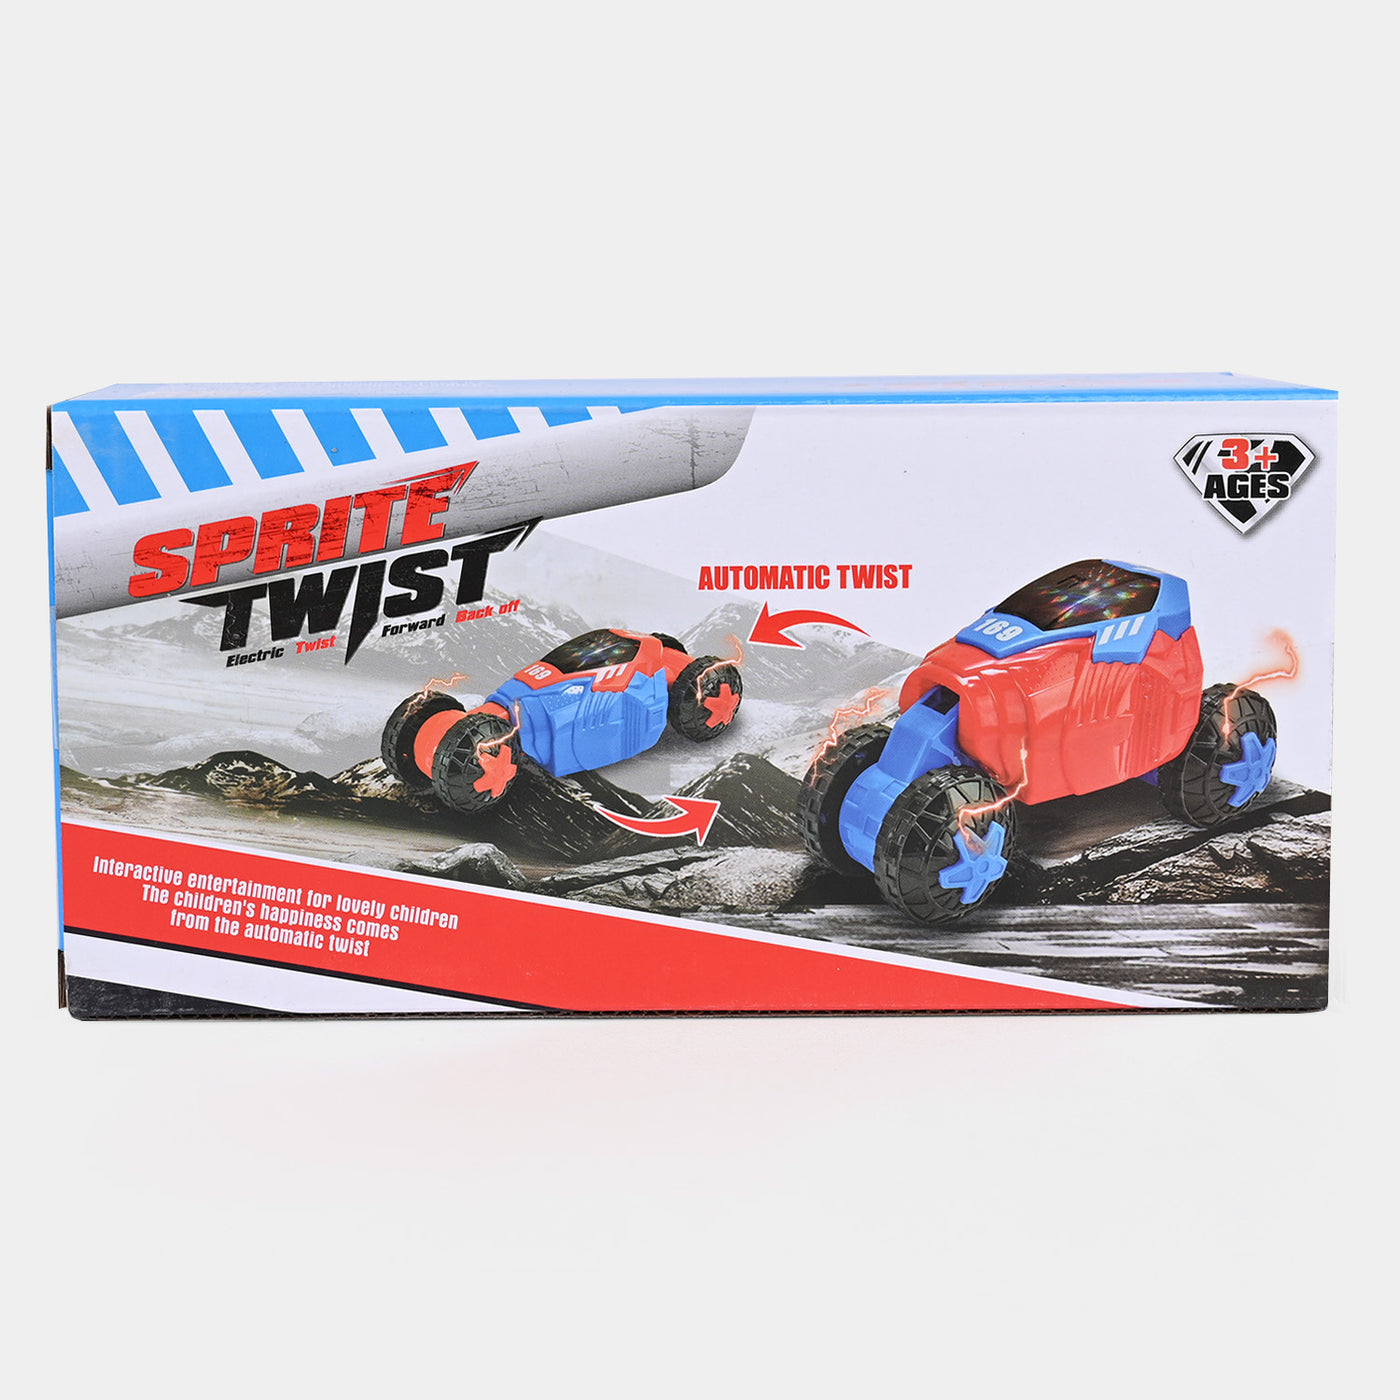 Stunt Car With Light & Music For Kids